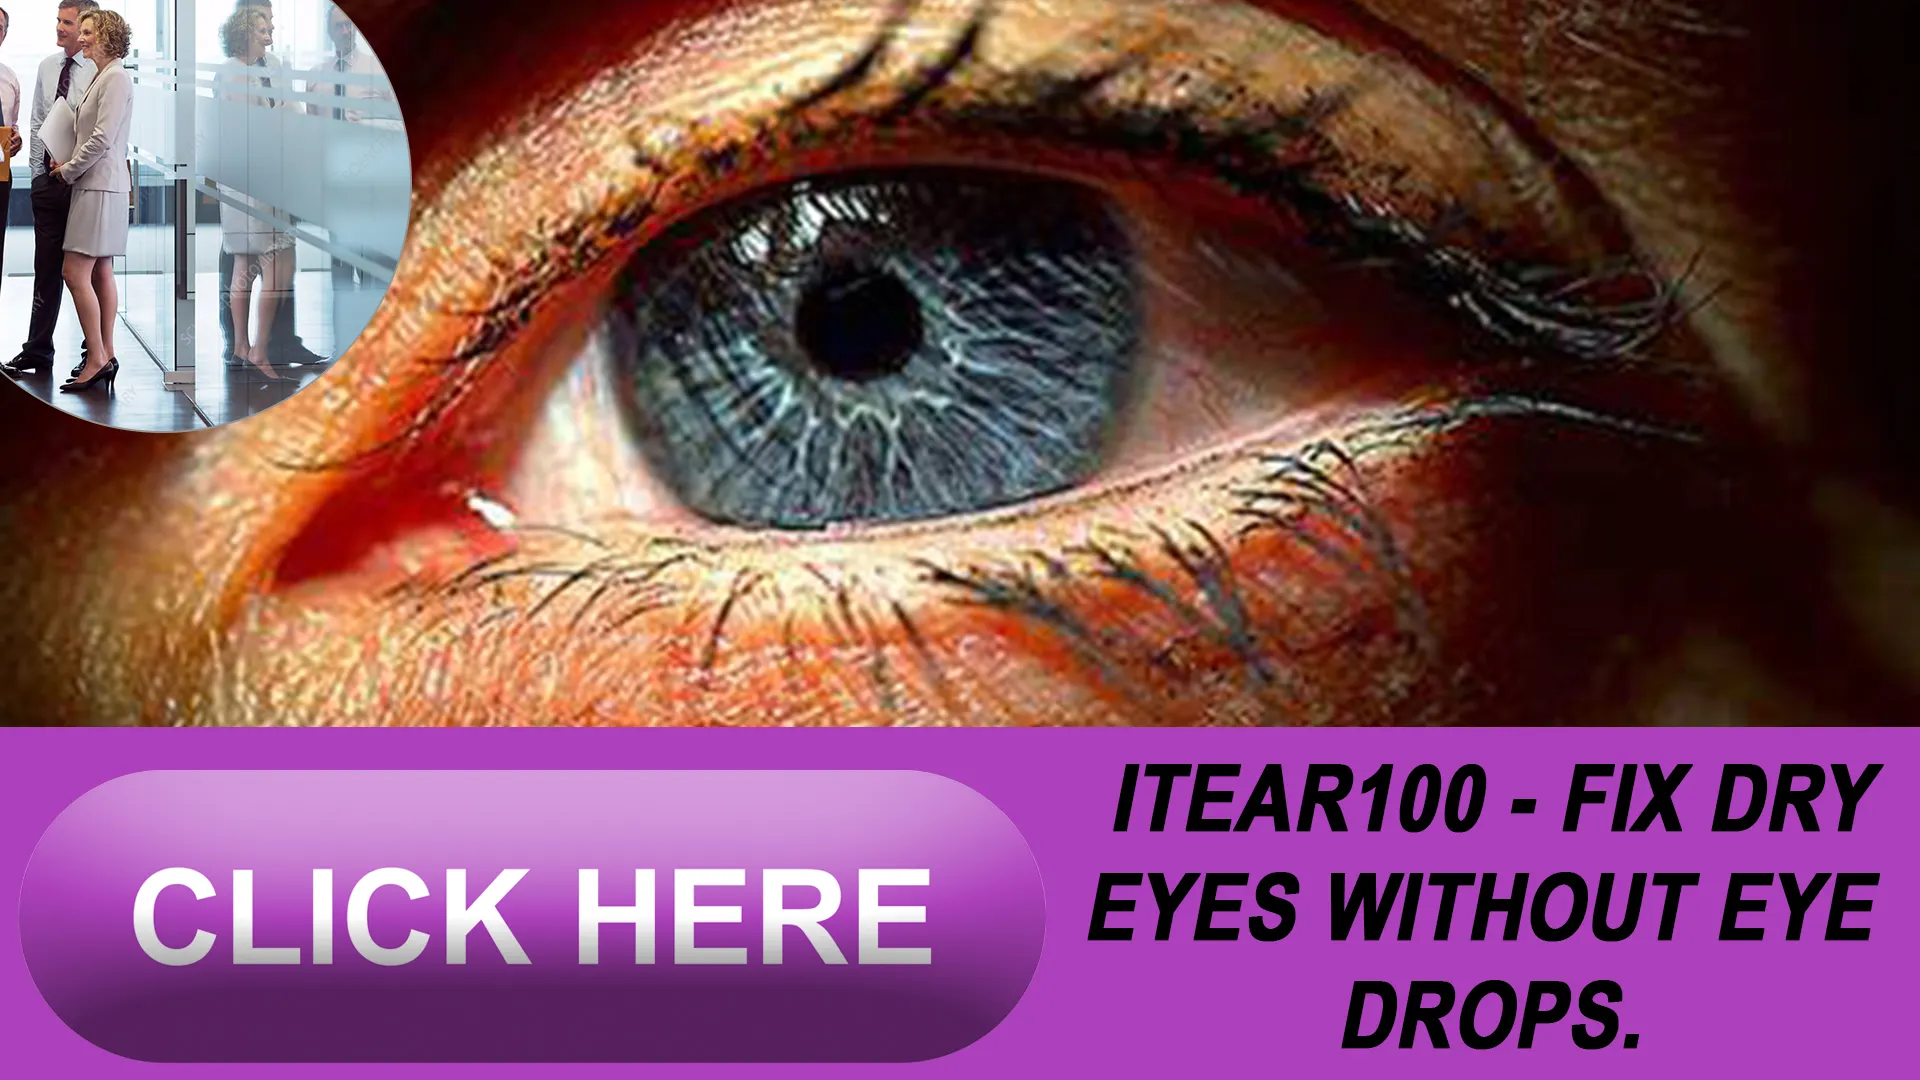 Why Choose iTEAR100 for Screen Use Dry Eye